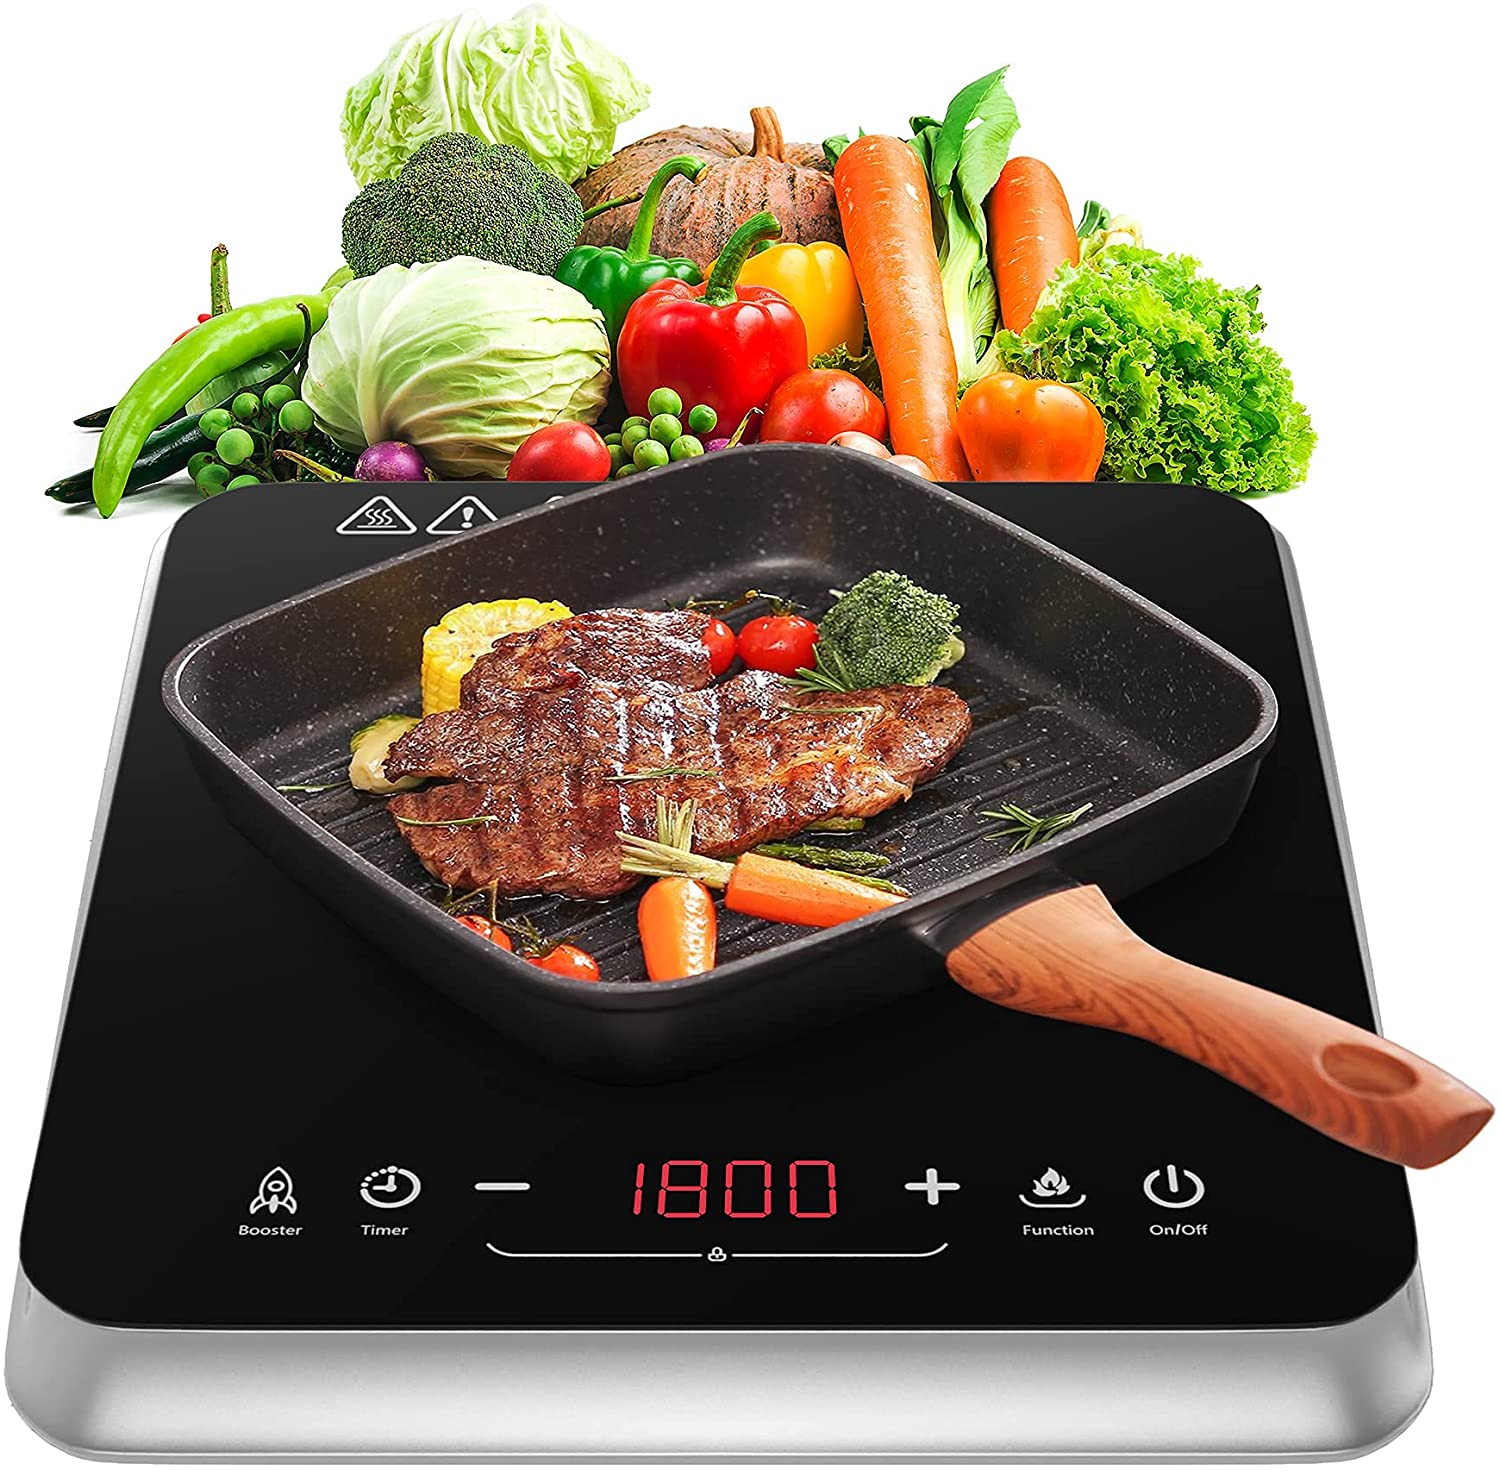 Induction-Cooktop Top 10 Gift Ideas For 70 Years Old Woman in Birthday